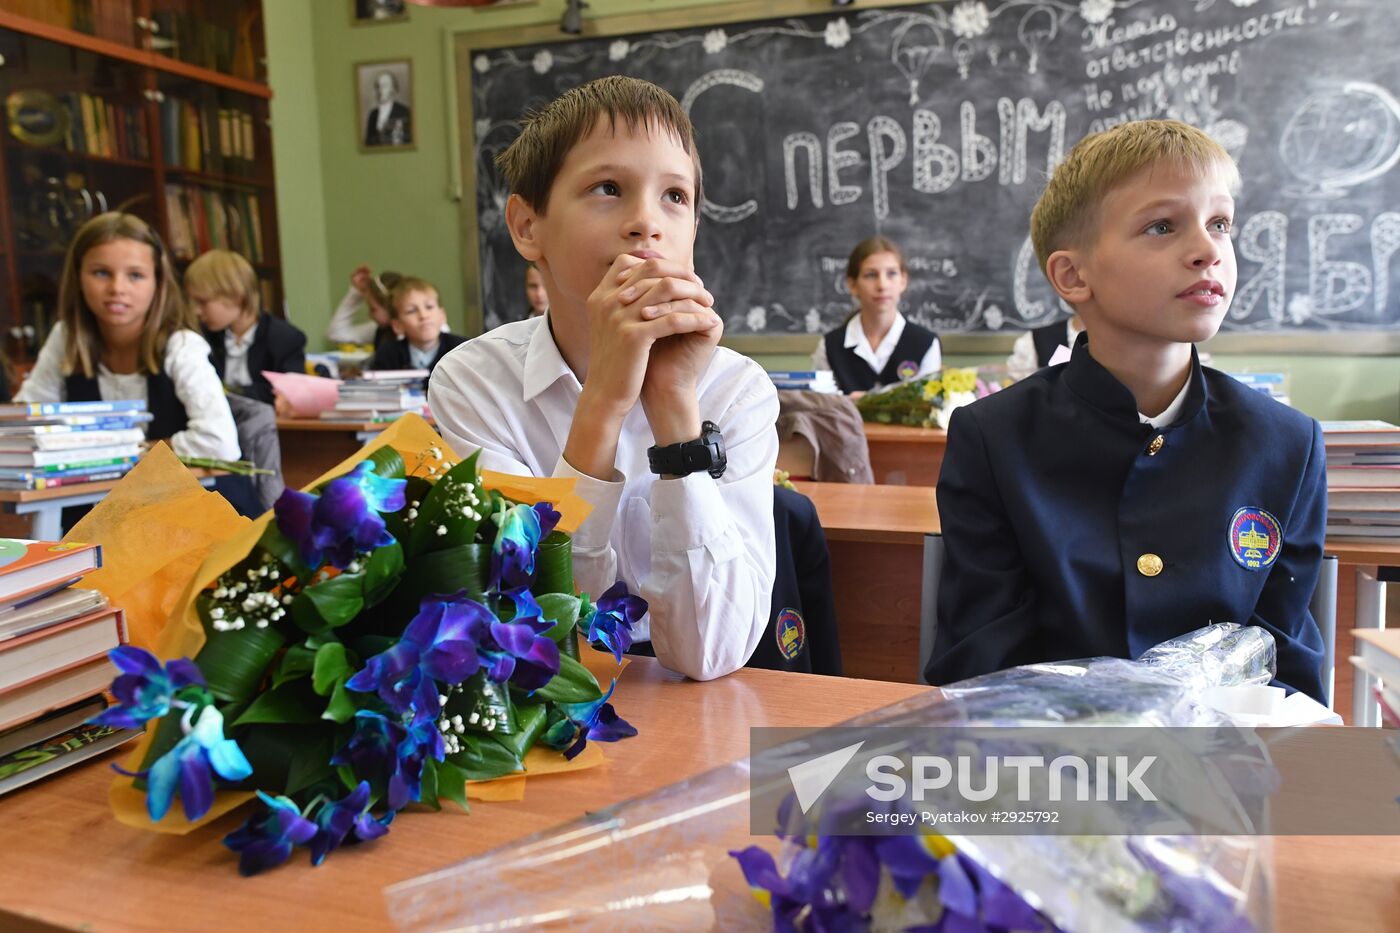 September 1 at Orthodox St.Peter school in Moscow